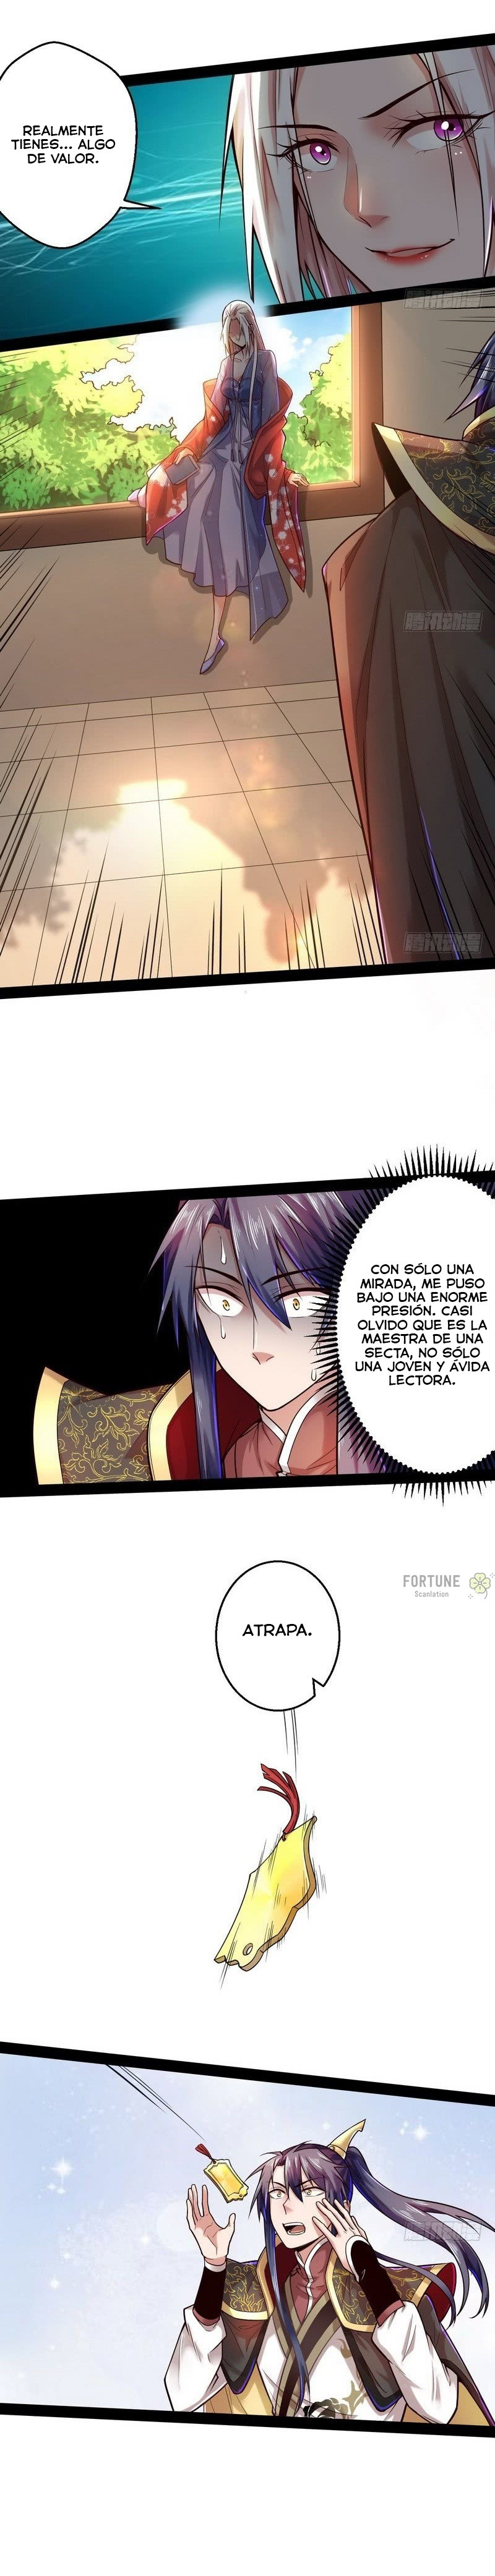 Manga Soy un dios maligno Chapter 11 image number 1